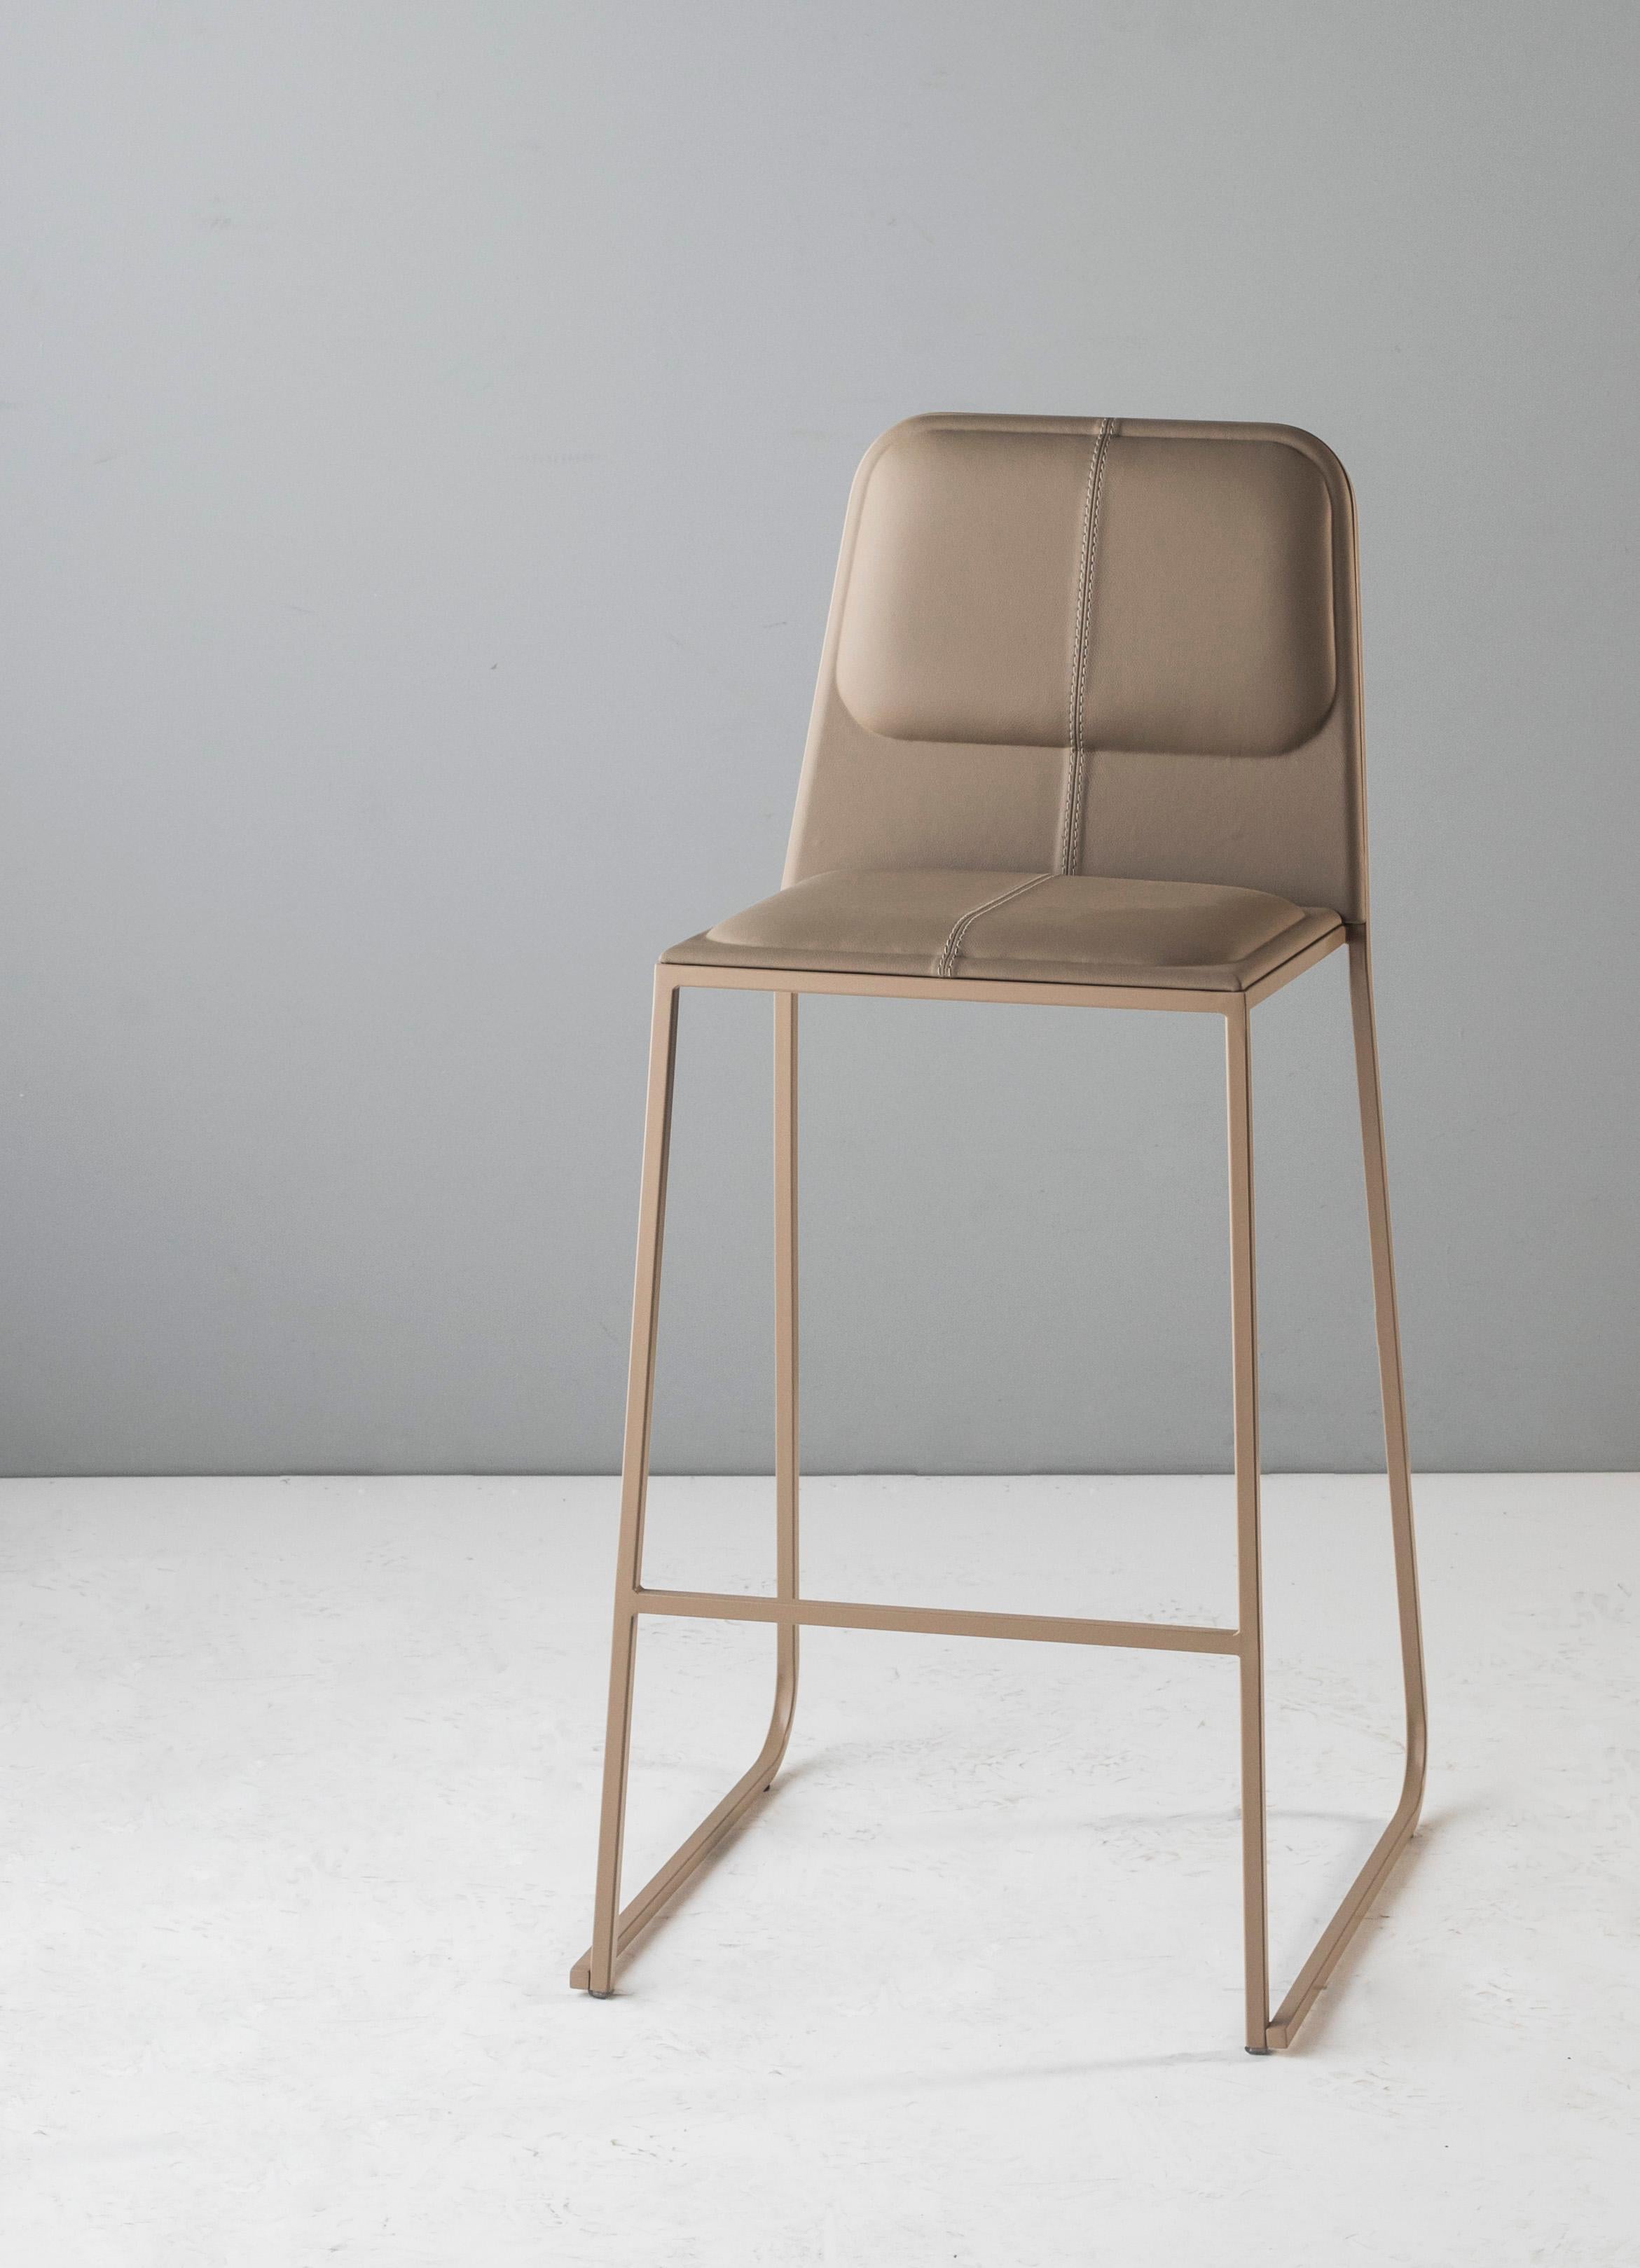 High Bora Bar Stool by Doimo Brasil
Dimensions: W 52 x D 56 x H 108 cm 
Materials: Paint, Natural leather.

Also available in W 52 x D 56 x H 92 cm, Seat Height: 60 cm. 

With the intention of providing good taste and personality, Doimo deciphers